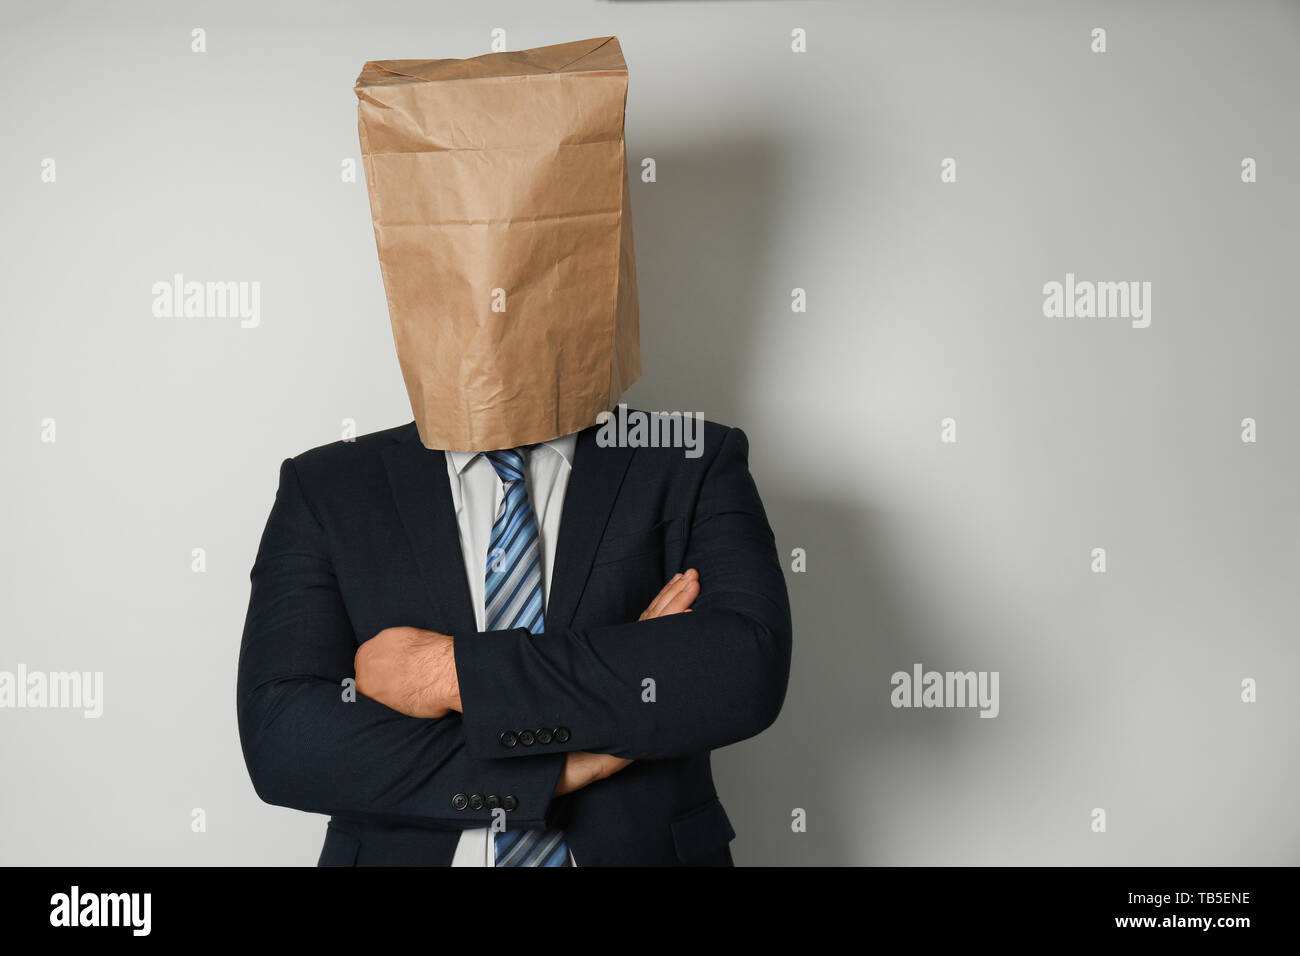 Businessman with paper bag on his head against light background Stock Photo